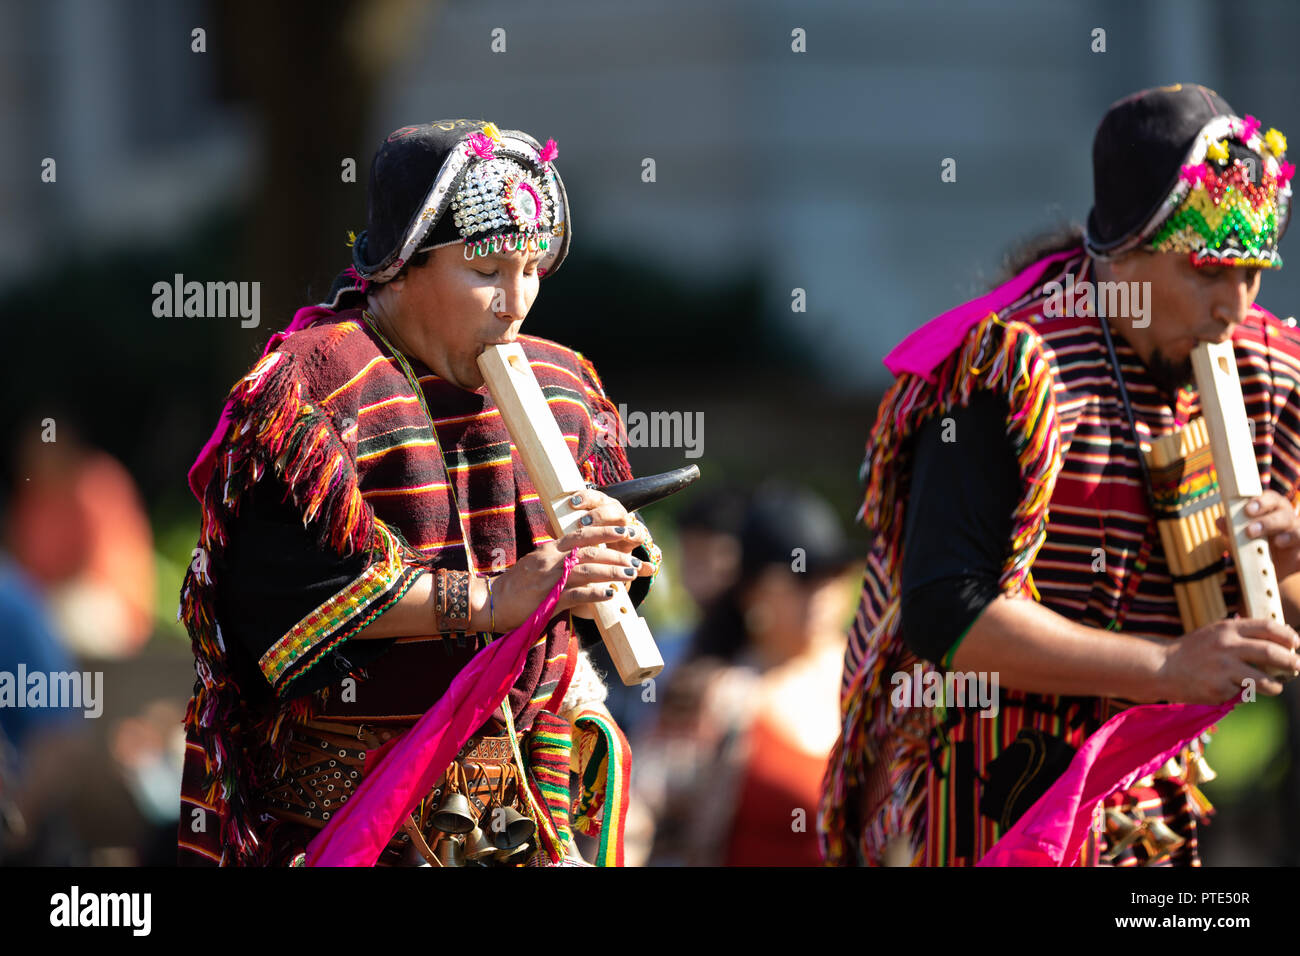 Washington, D.C., USA - September 29, 2018: The Fiesta DC Parade, Bolivian men wearing traditional clothing playing the Tarka, indigenous andes flute Stock Photo